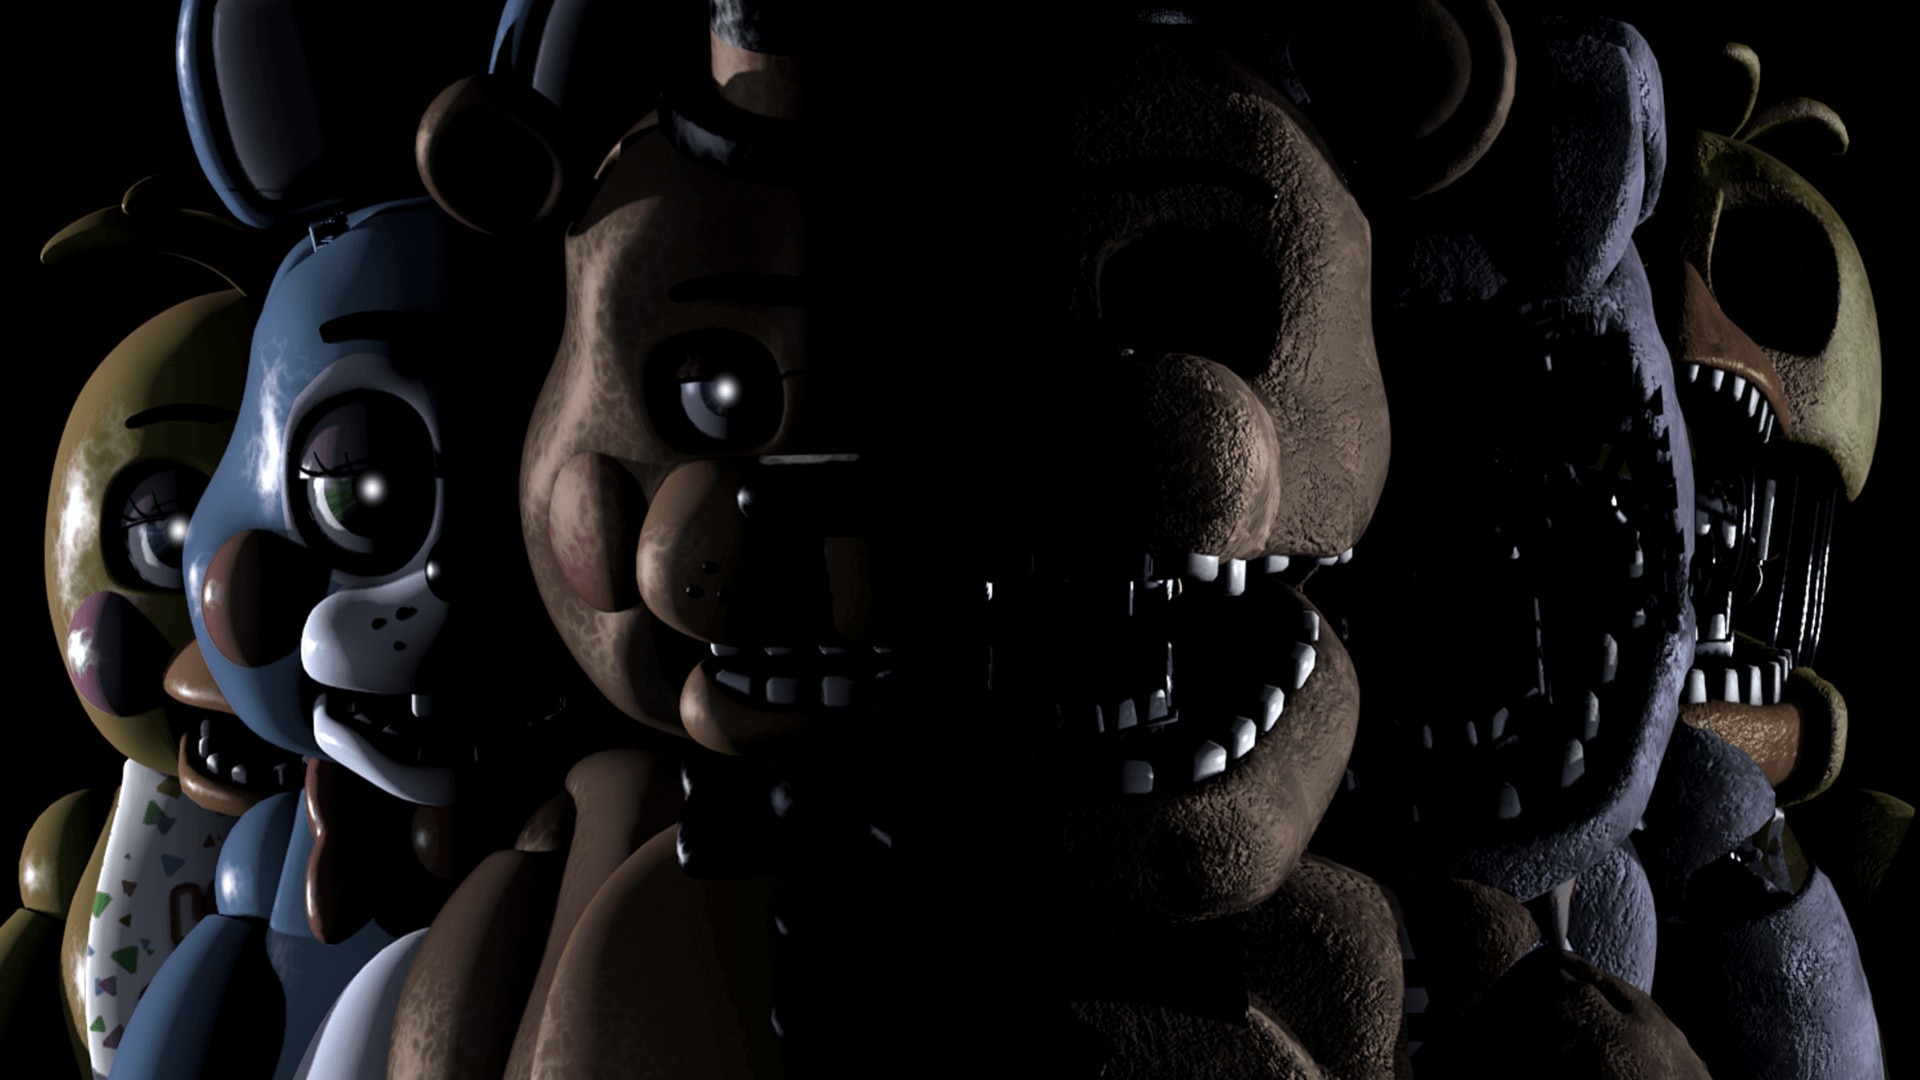 Sister location females + Toy Chica, Random afton thing (we are full,  sorry)